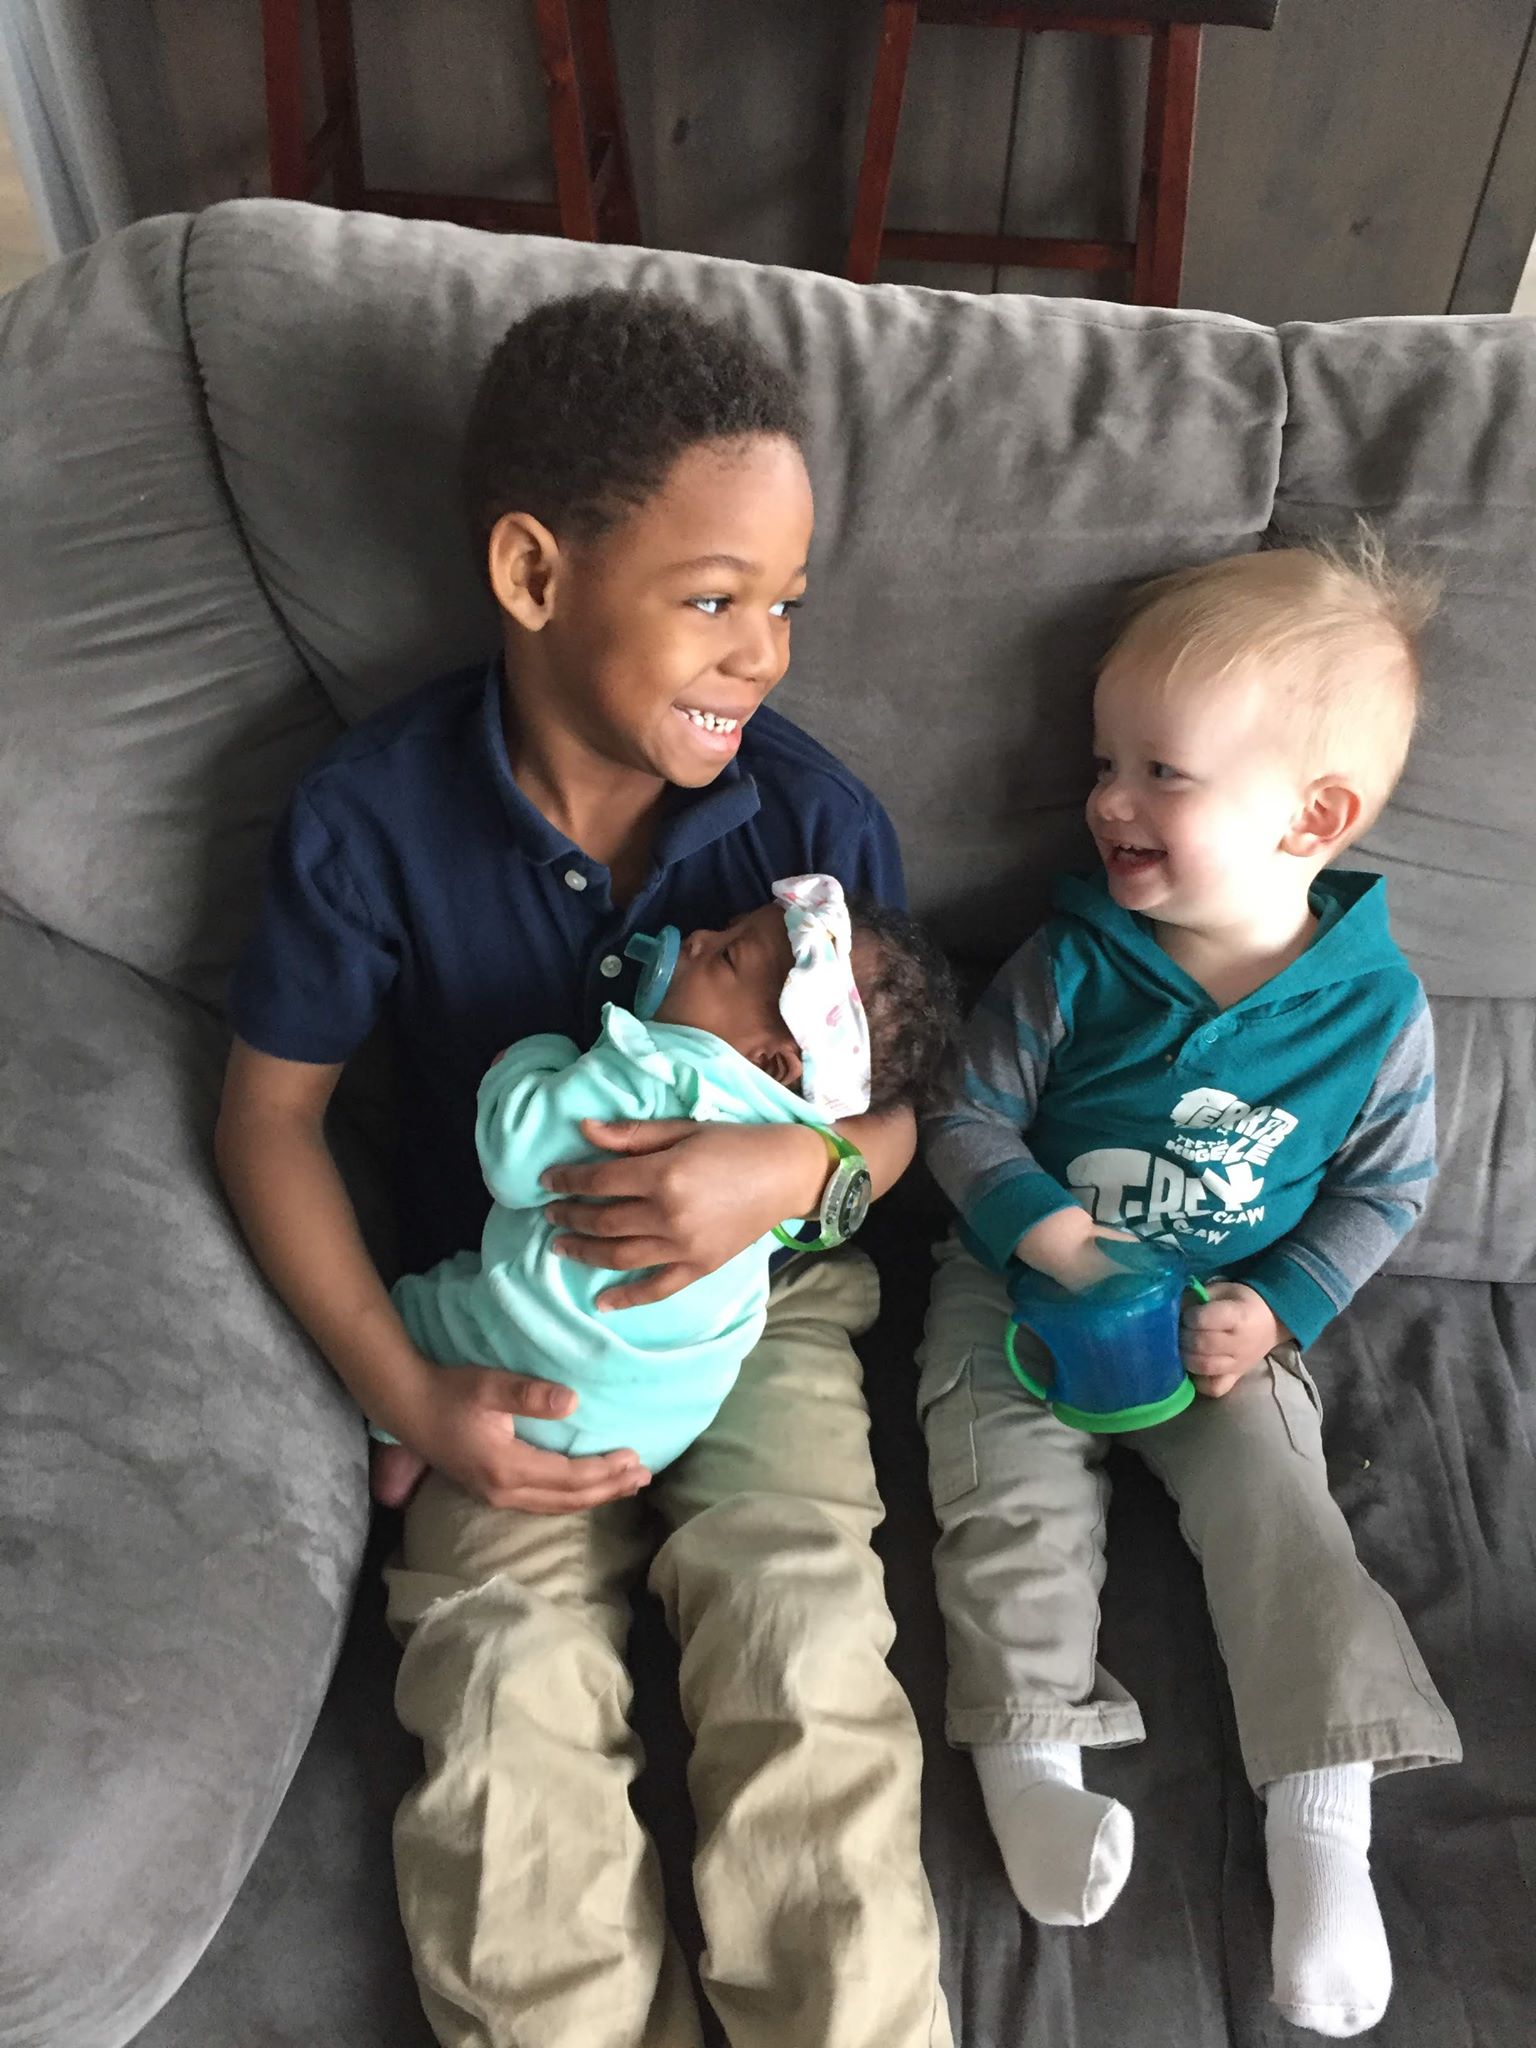 PHOTO: Milo Weight, 5 and his brother Nash Weight, 2, are seen in an undated photo with their baby sister, Onni Weight, 3 months. 